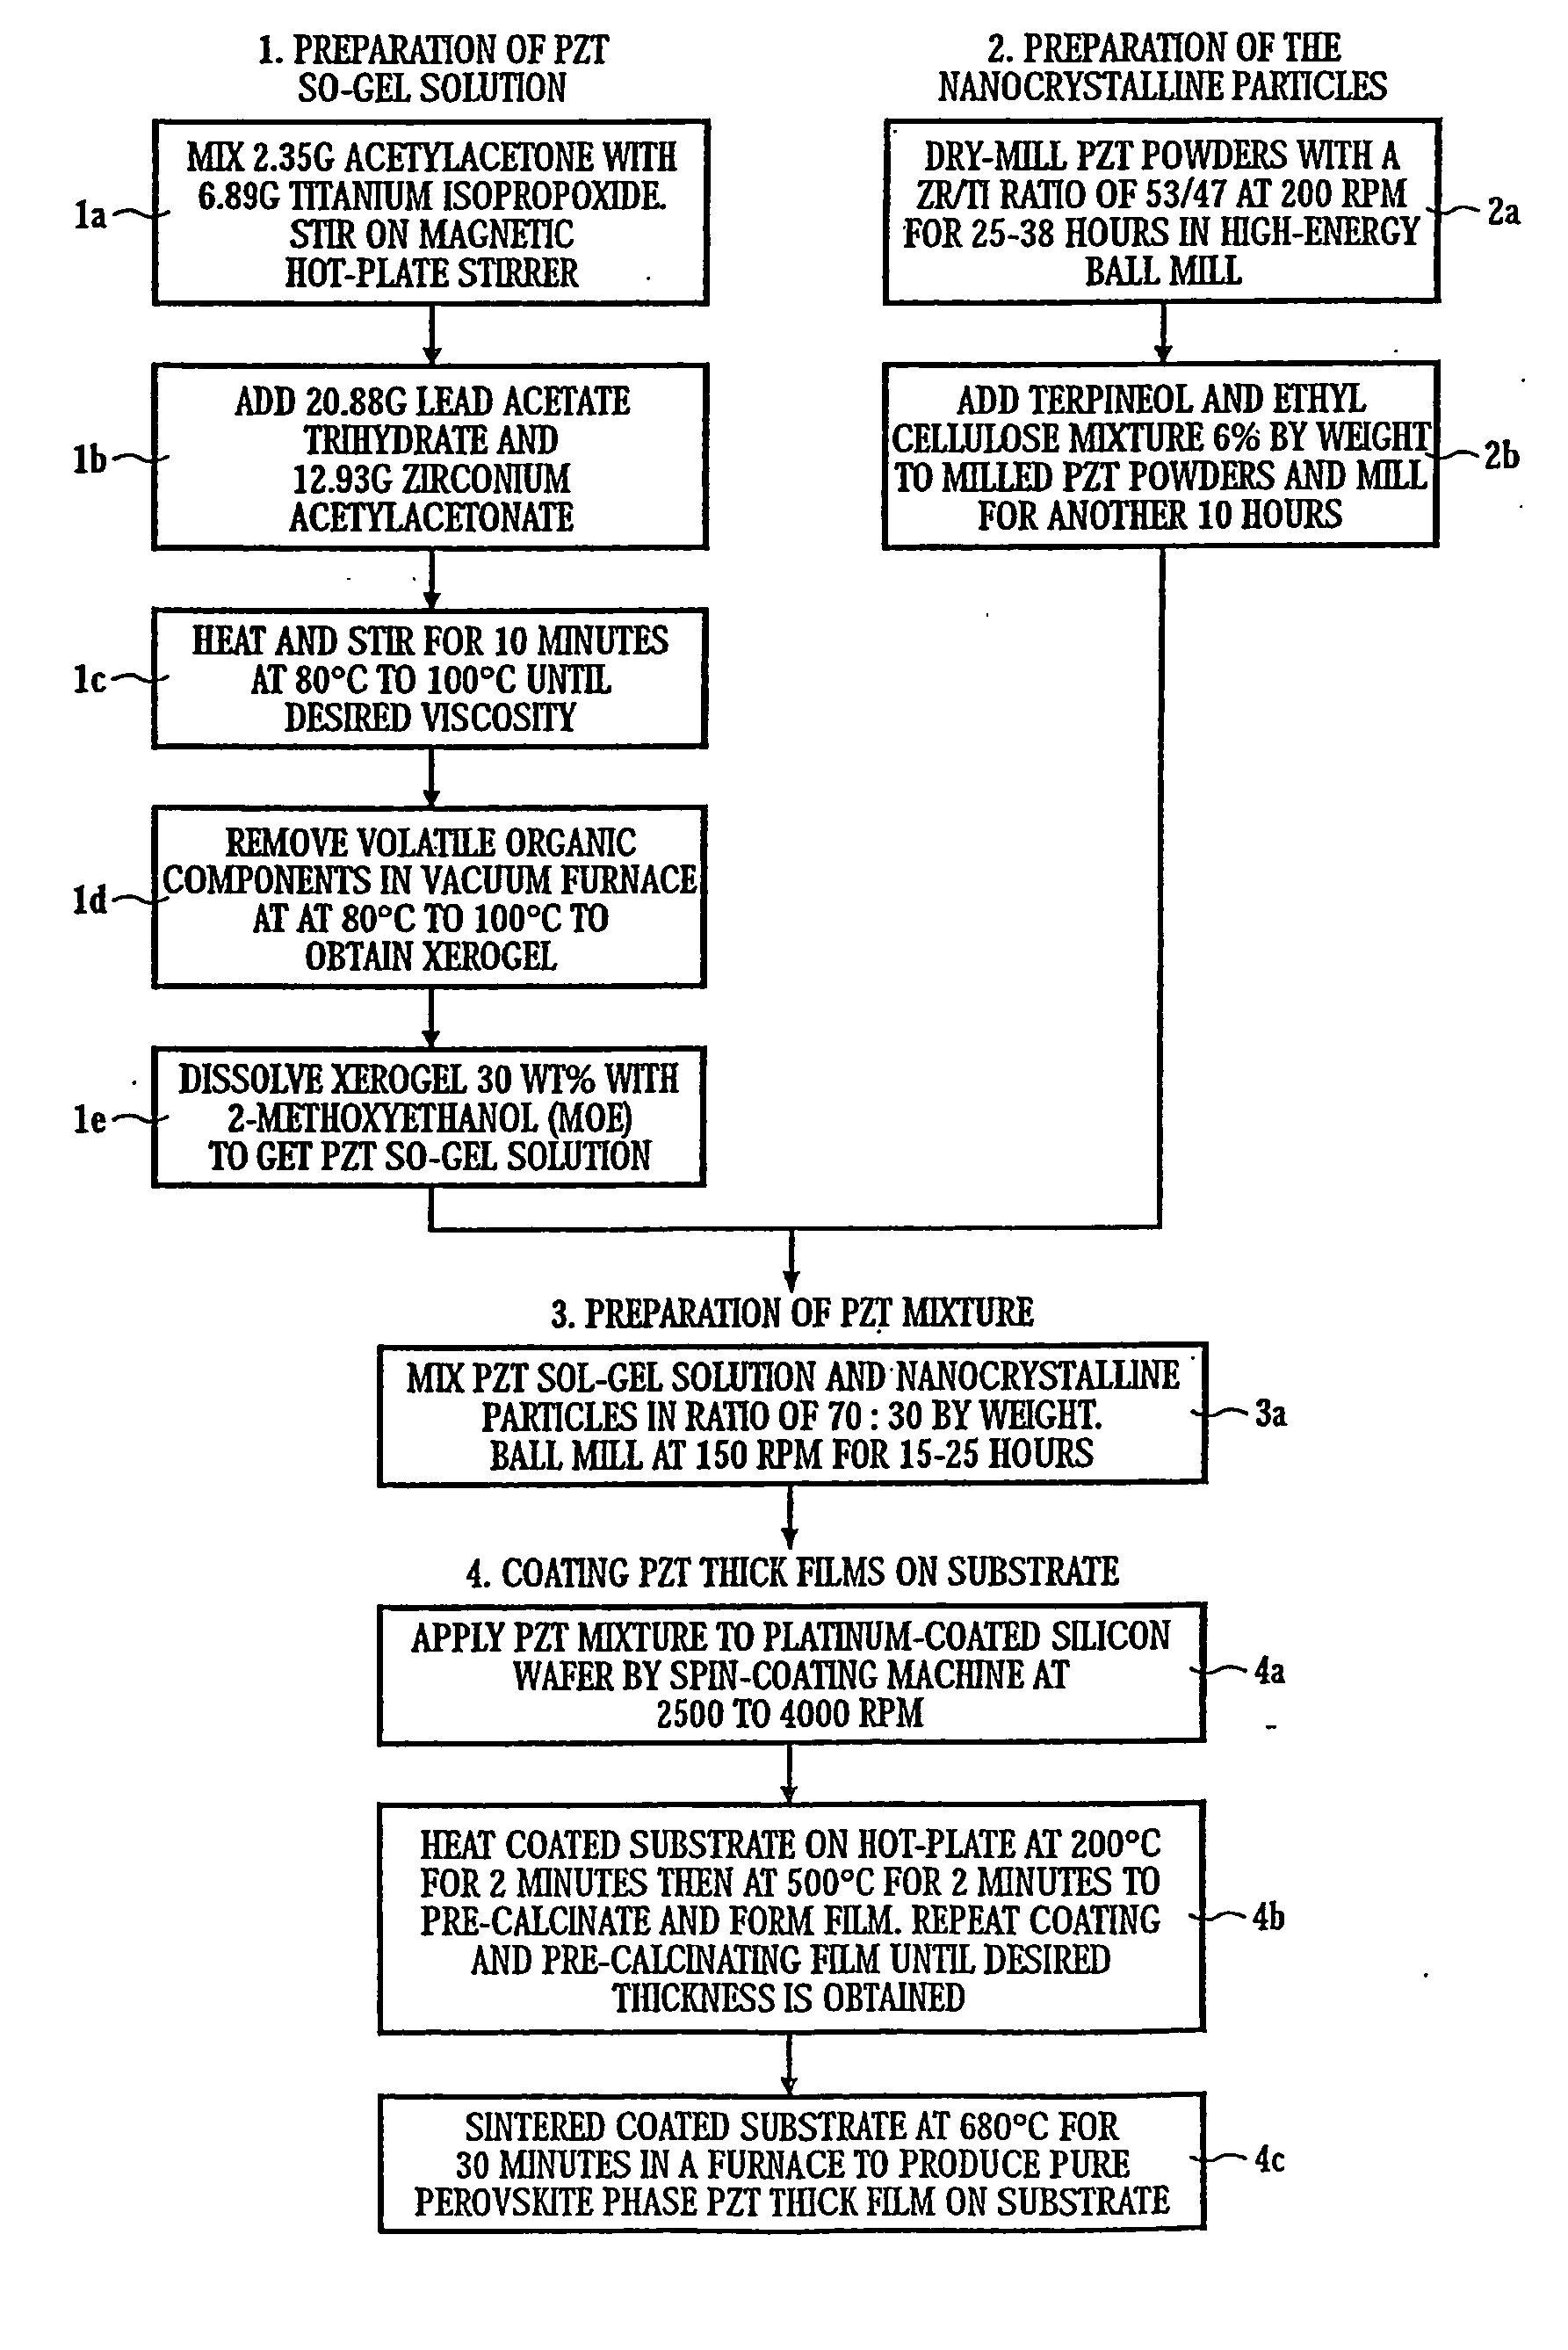 Process for producing nanorcrystalline composites